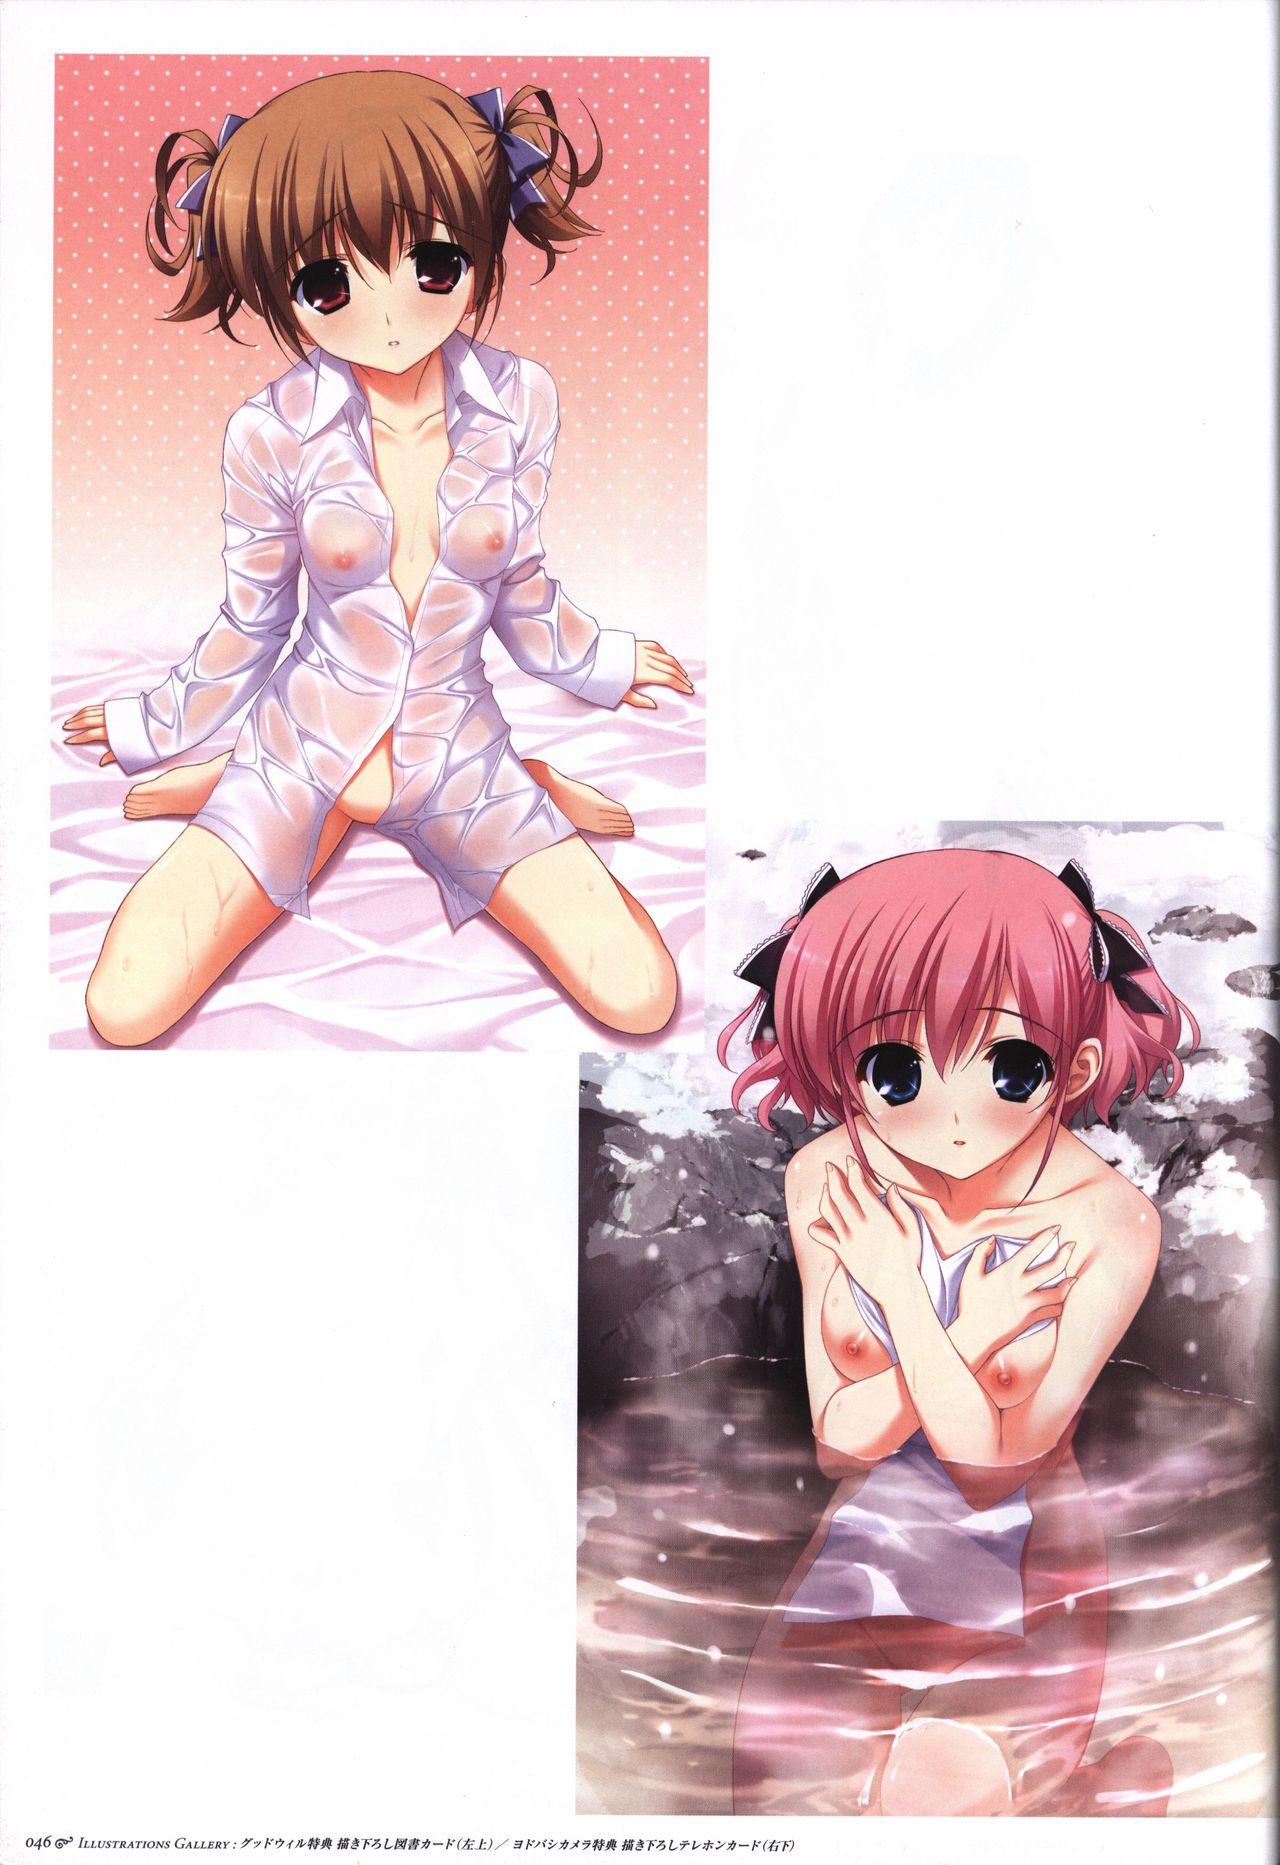 The Fruit of Grisaia Visual FanBook 46